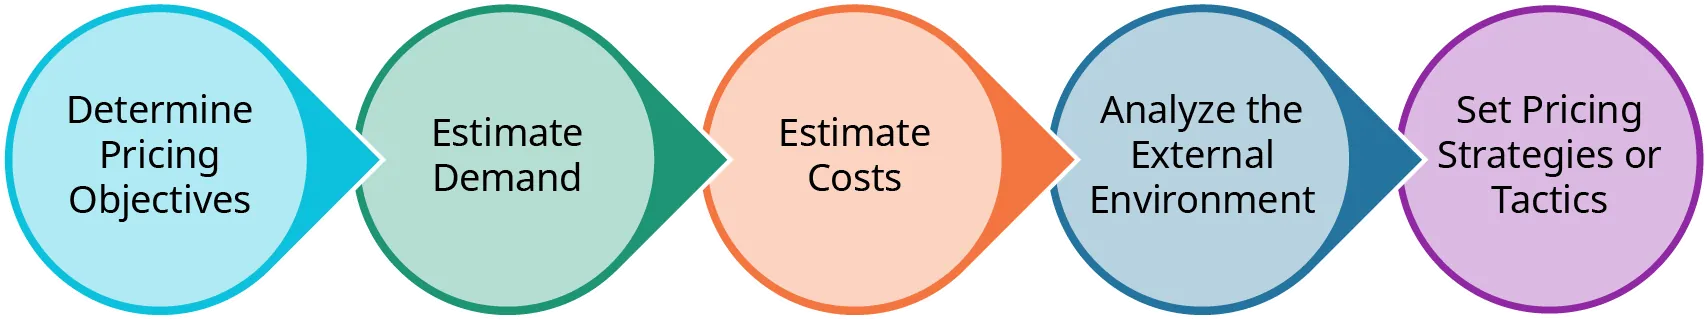 The five step policy for establishing pricing policies are displayed as circles in a horizontal row, with a point pointing rightward to the next step. Starting at the left, the policies are: determine pricing objectives, estimate demand, estimate costs, analyze the external environment, and set pricing strategies or tactics.